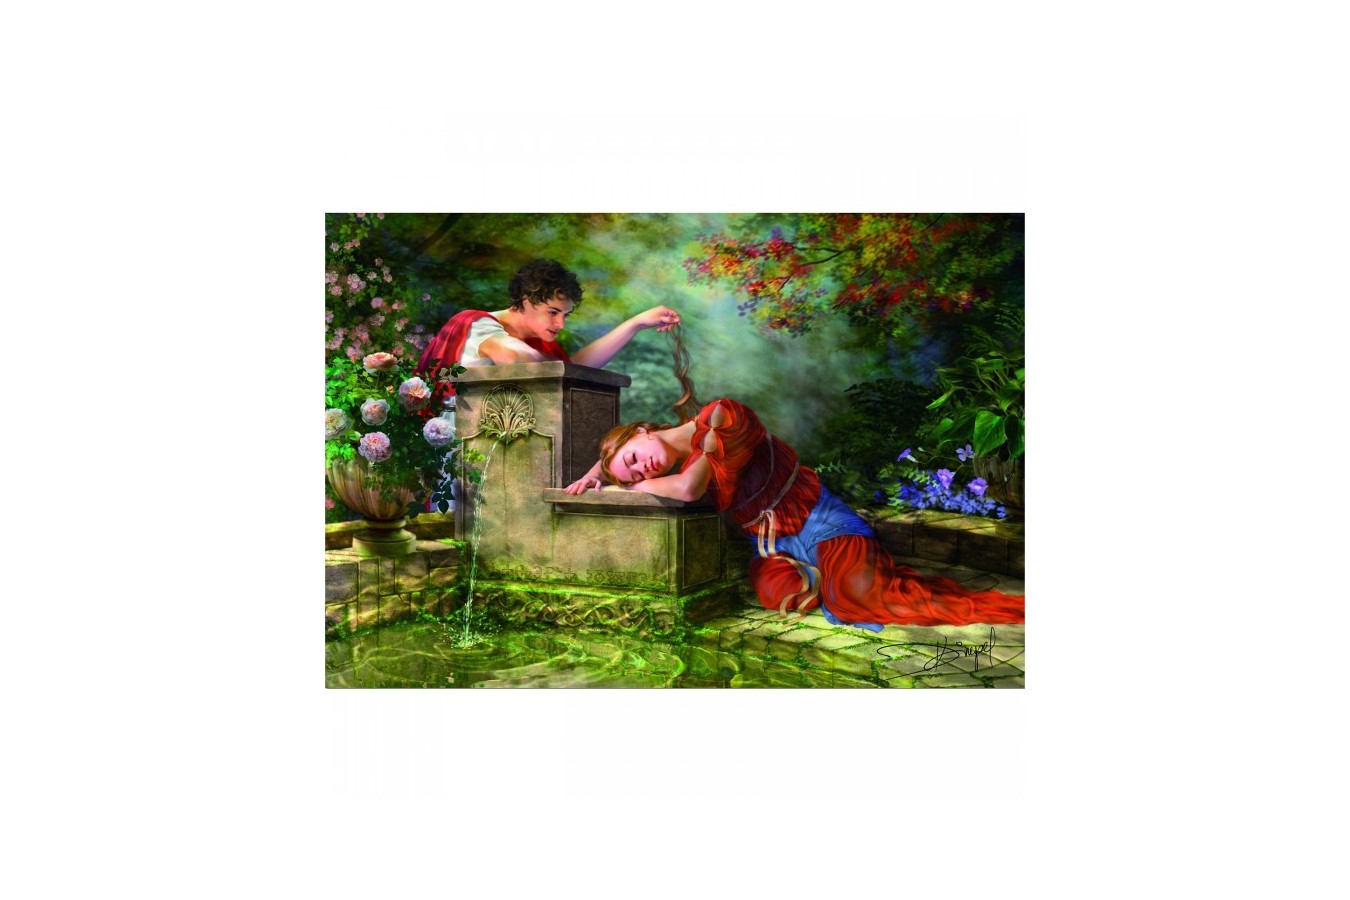 Puzzle Educa - While She was Sleeping, 8000 piese (15168)